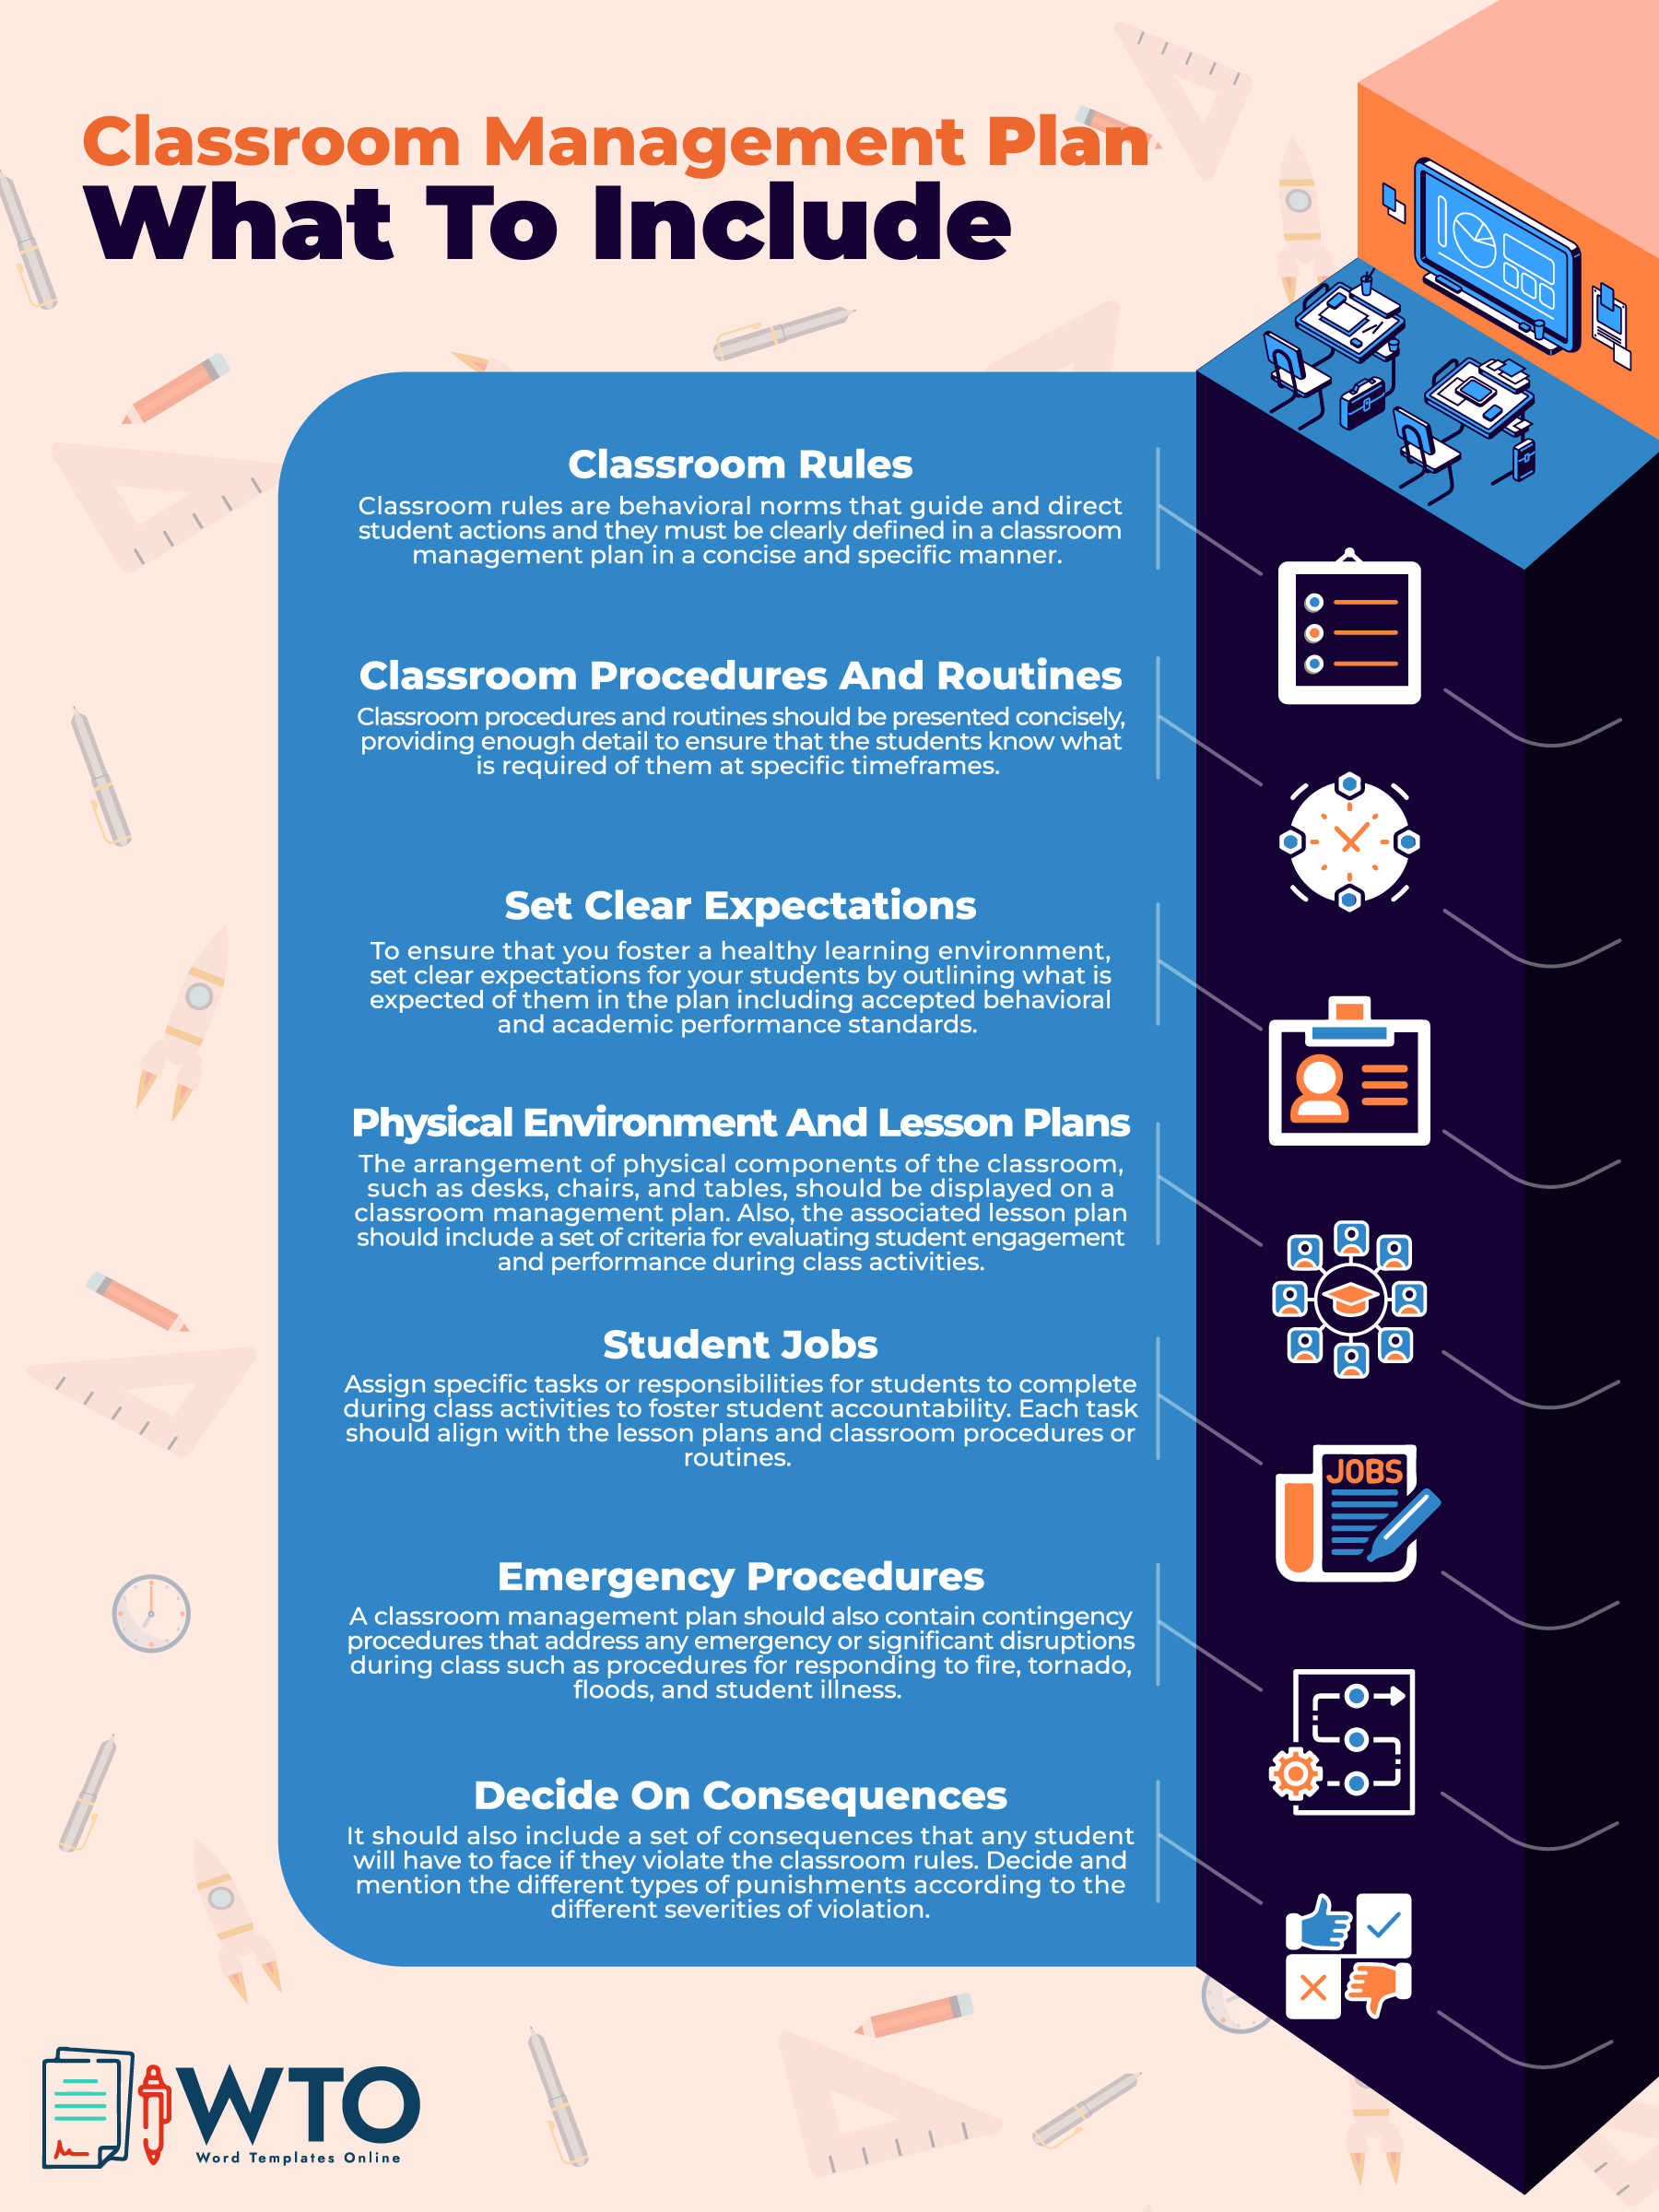 This infographic tells what to include in a Classroom Management Plan.